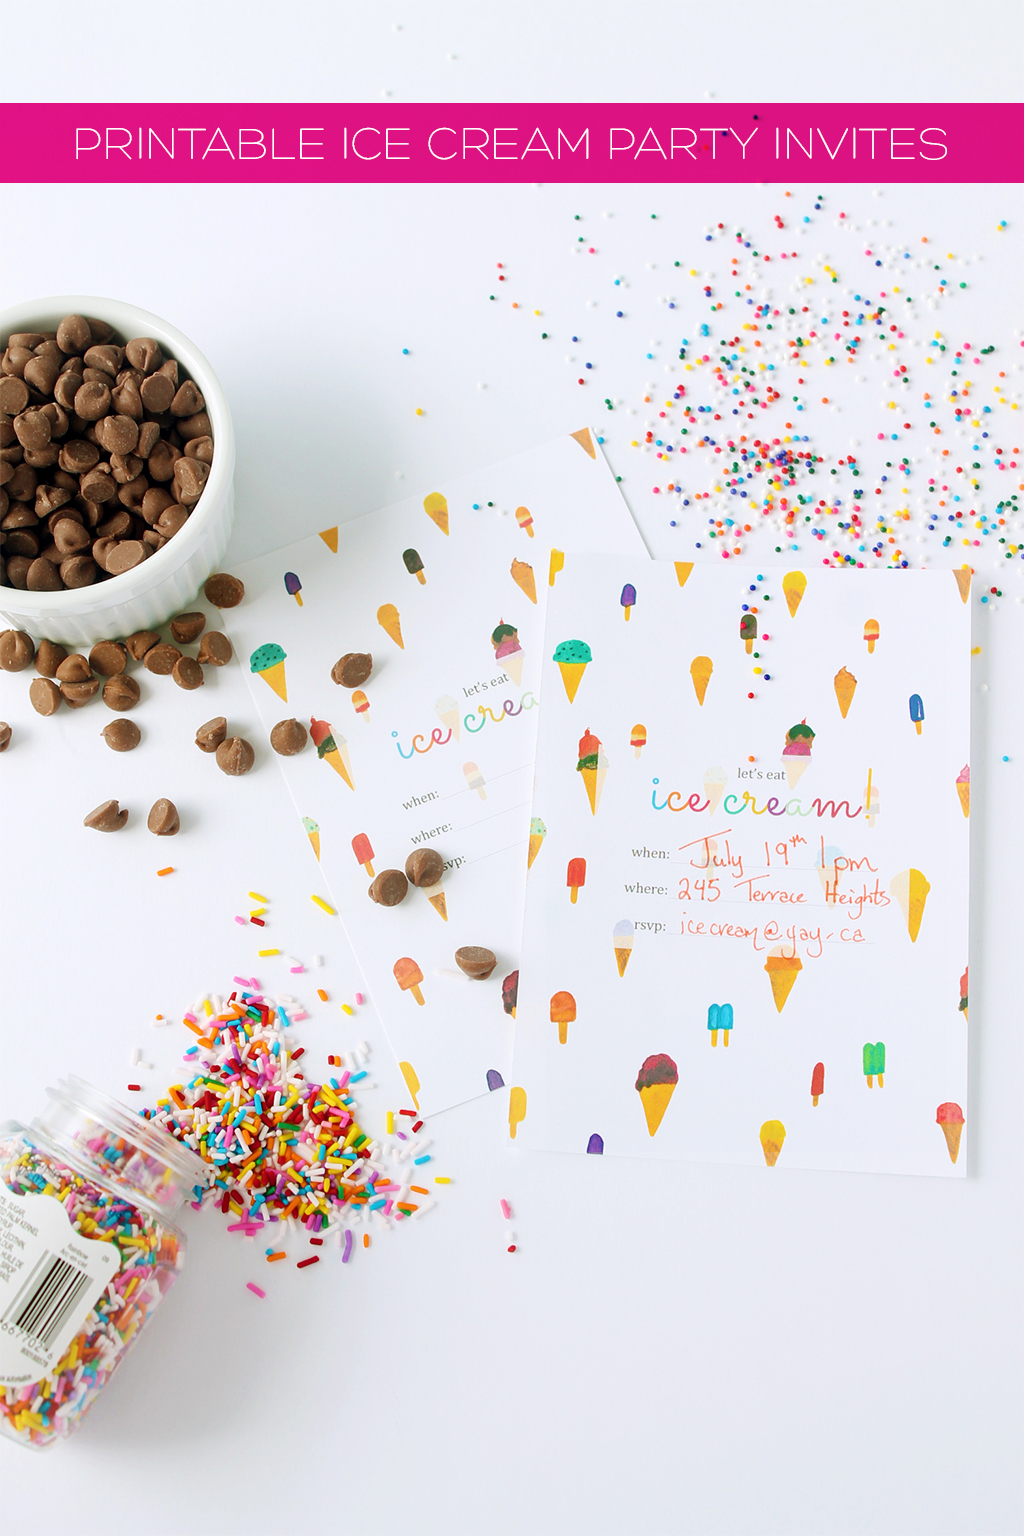 Printable Ice Cream Party Invitation | Squirrelly Minds